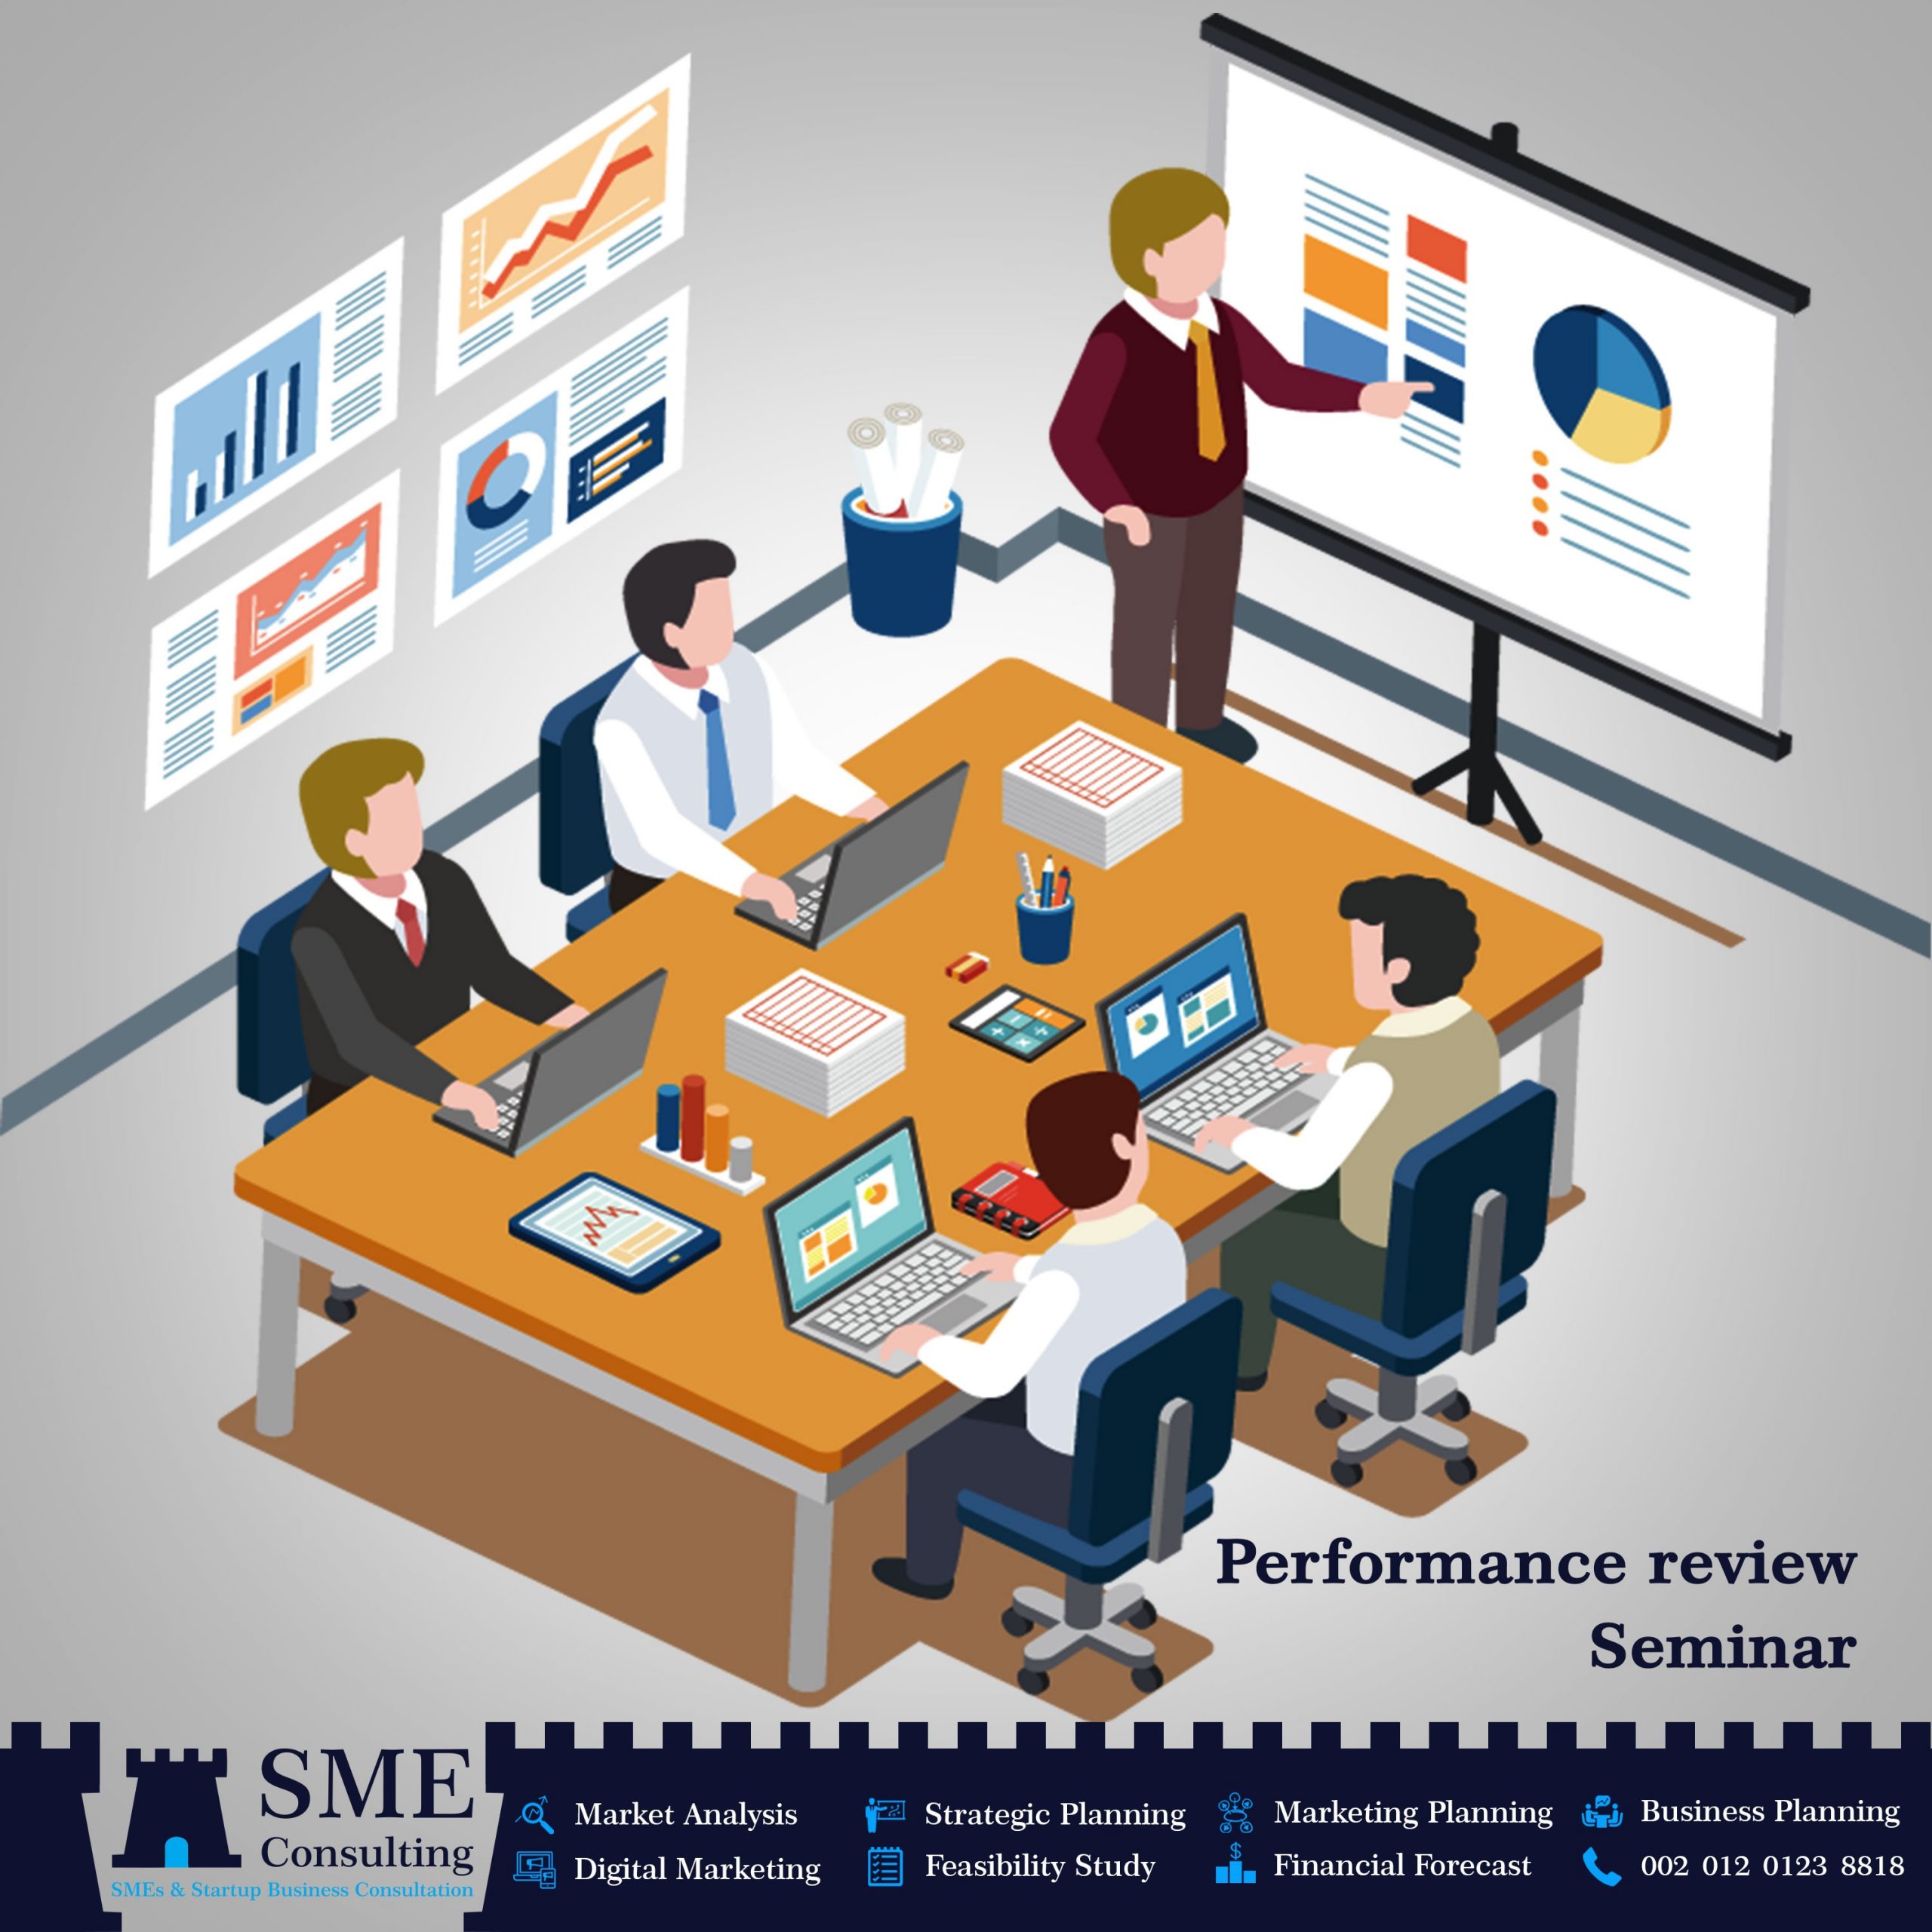 SME Consulting - 2018 Performance Review